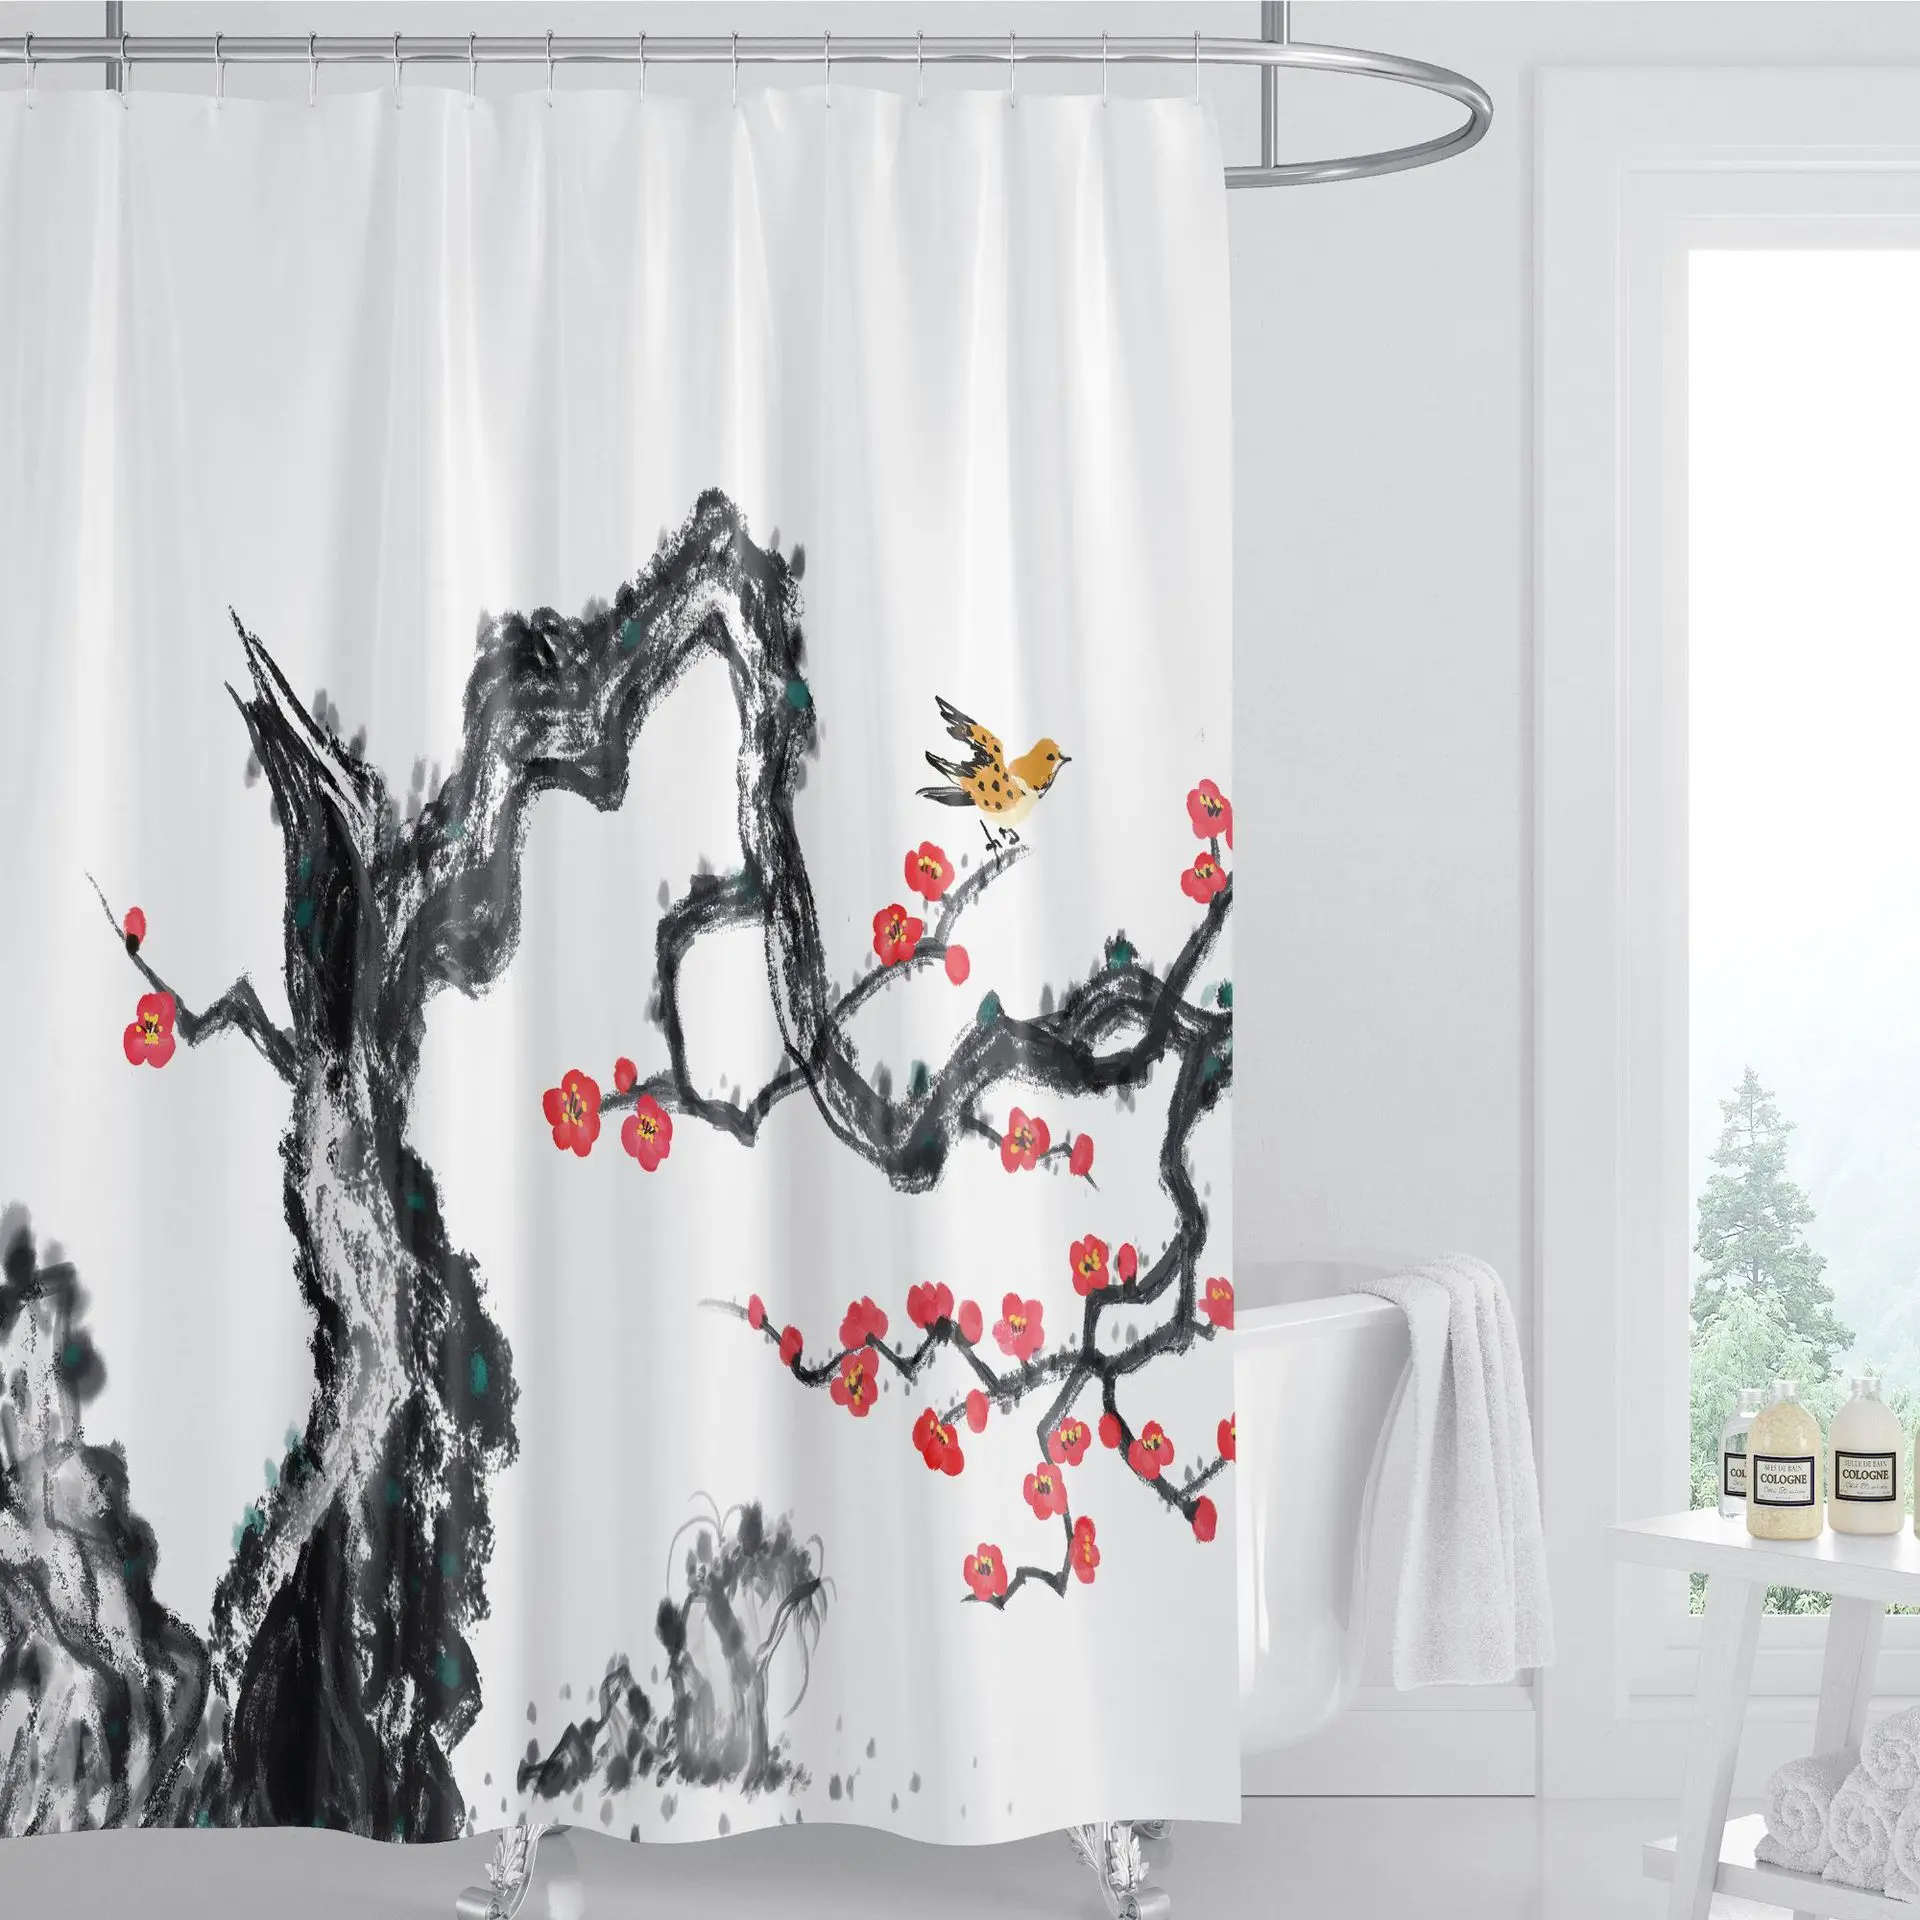 

Cherry Blossom Shower Curtain Floral Sakura Pink Plum Asian Style Japanese Chinese Painting Birds Fabric Polyester Waterproof, As color card